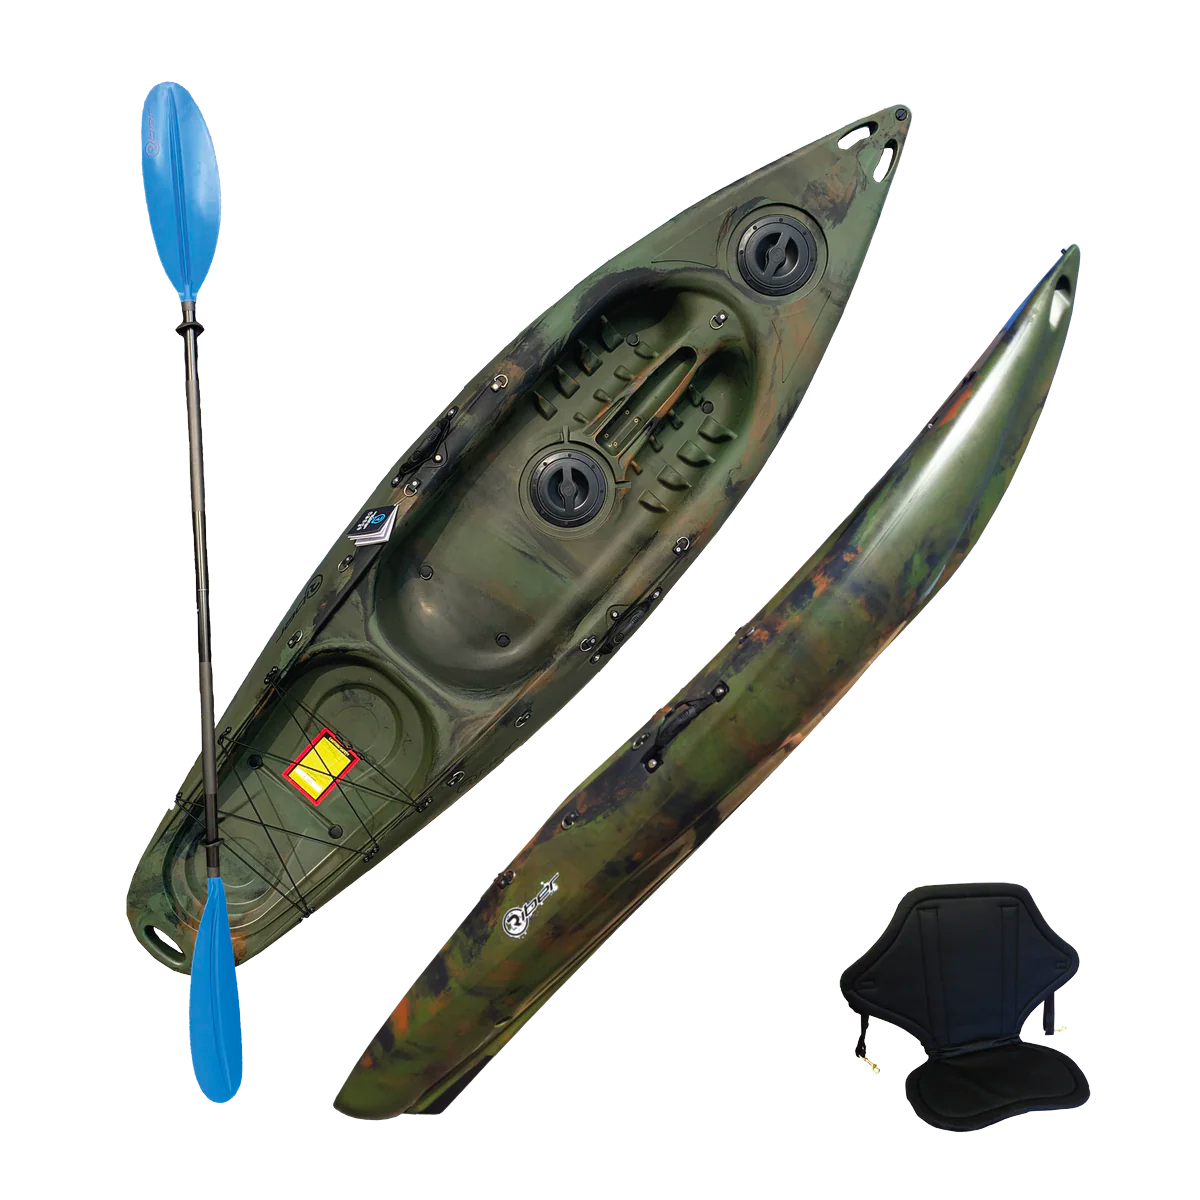 Deluxe_Sit-On-Top_Kayak_Camo-ExcelBoats